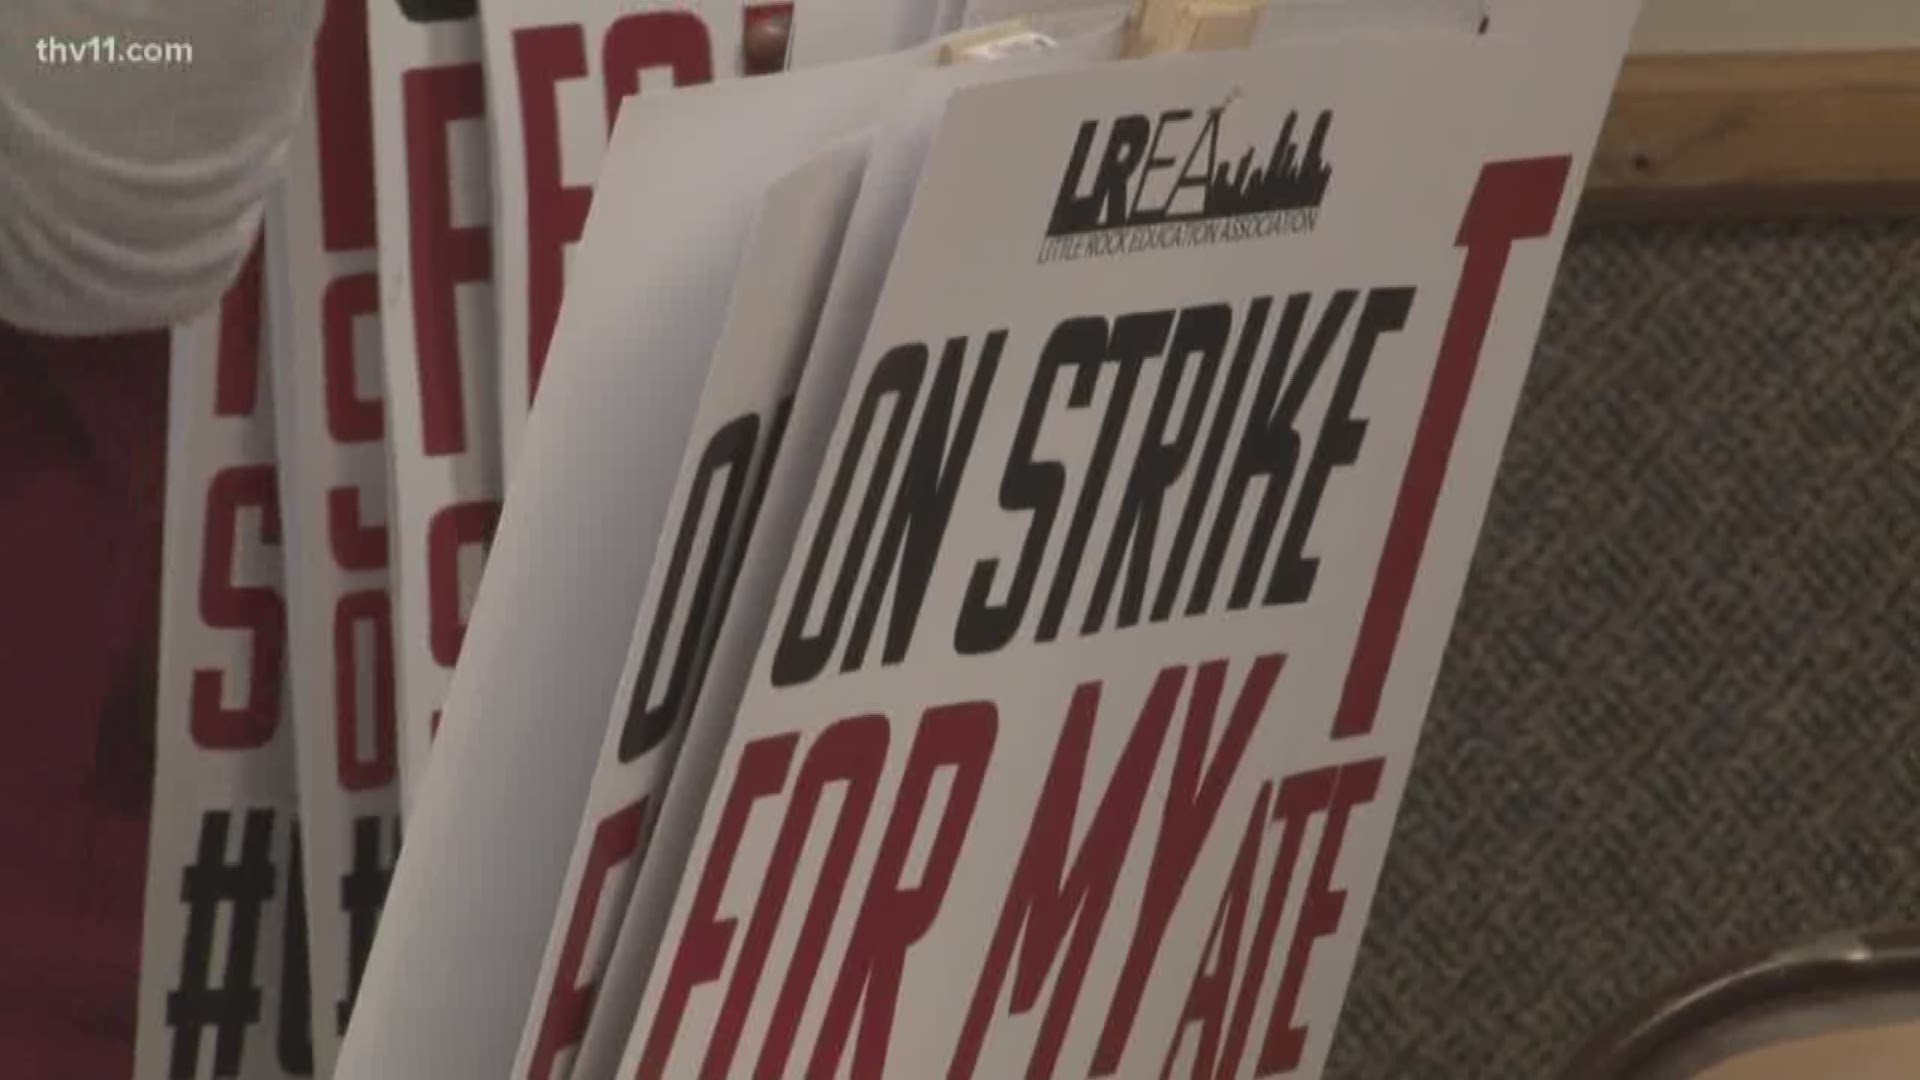 A strike like this has only happened once before in the Little Rock School District. A lot of people, especially parents, just don't know what to expect.